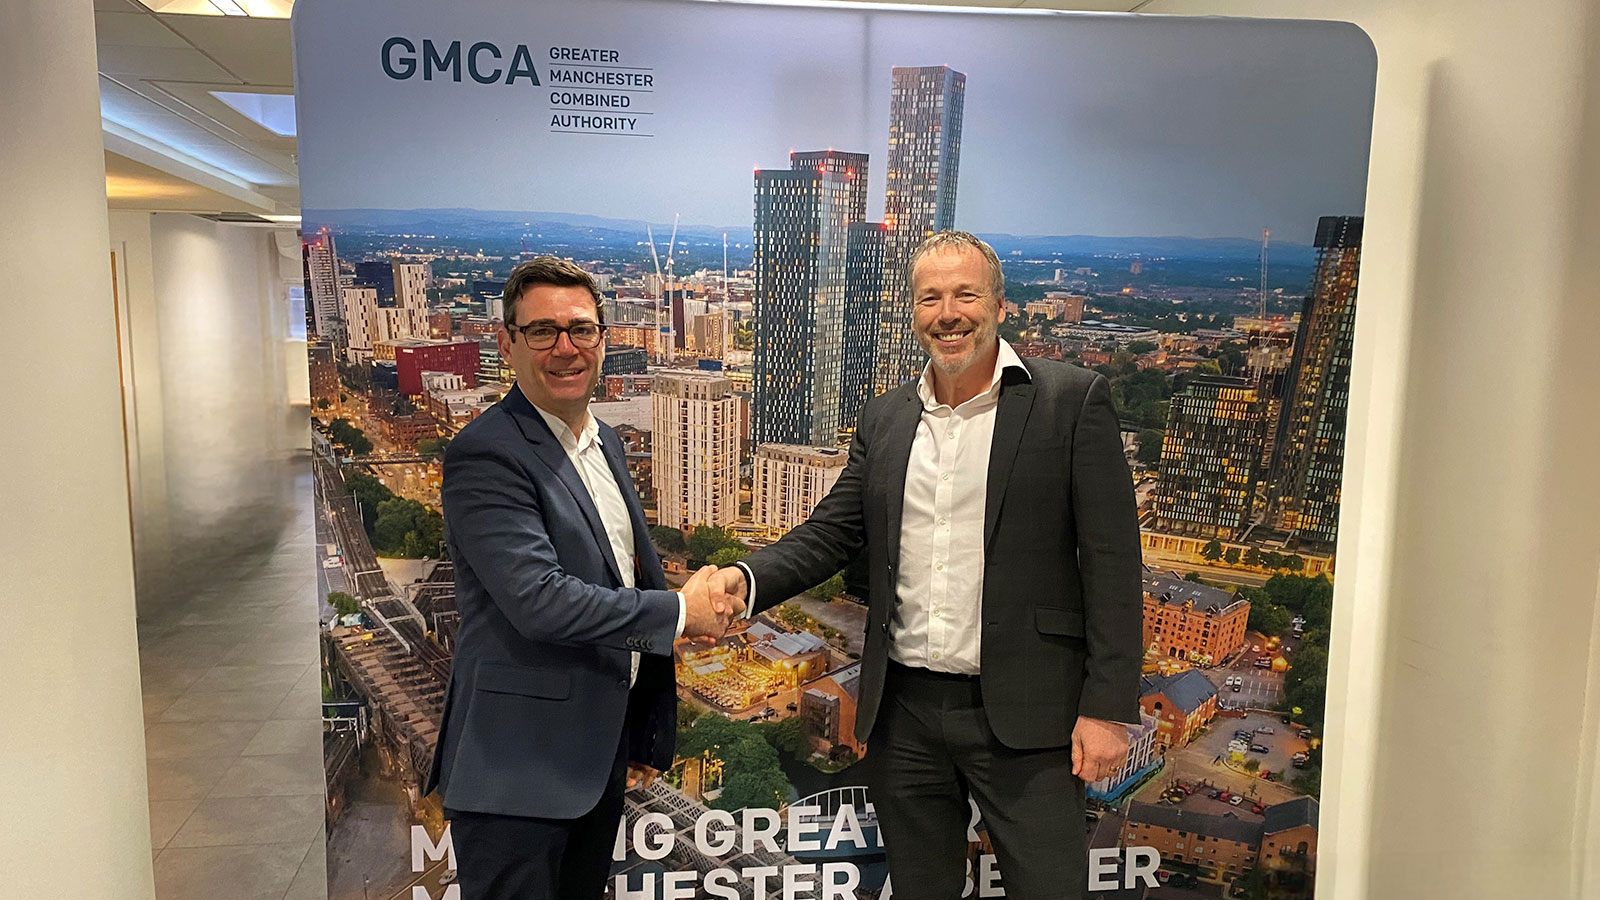 Greater Manchester Combined Authority (GMCA) has entered into a strategic agreement with SSE Energy Solutions to transform the region into a hub for green energy projects